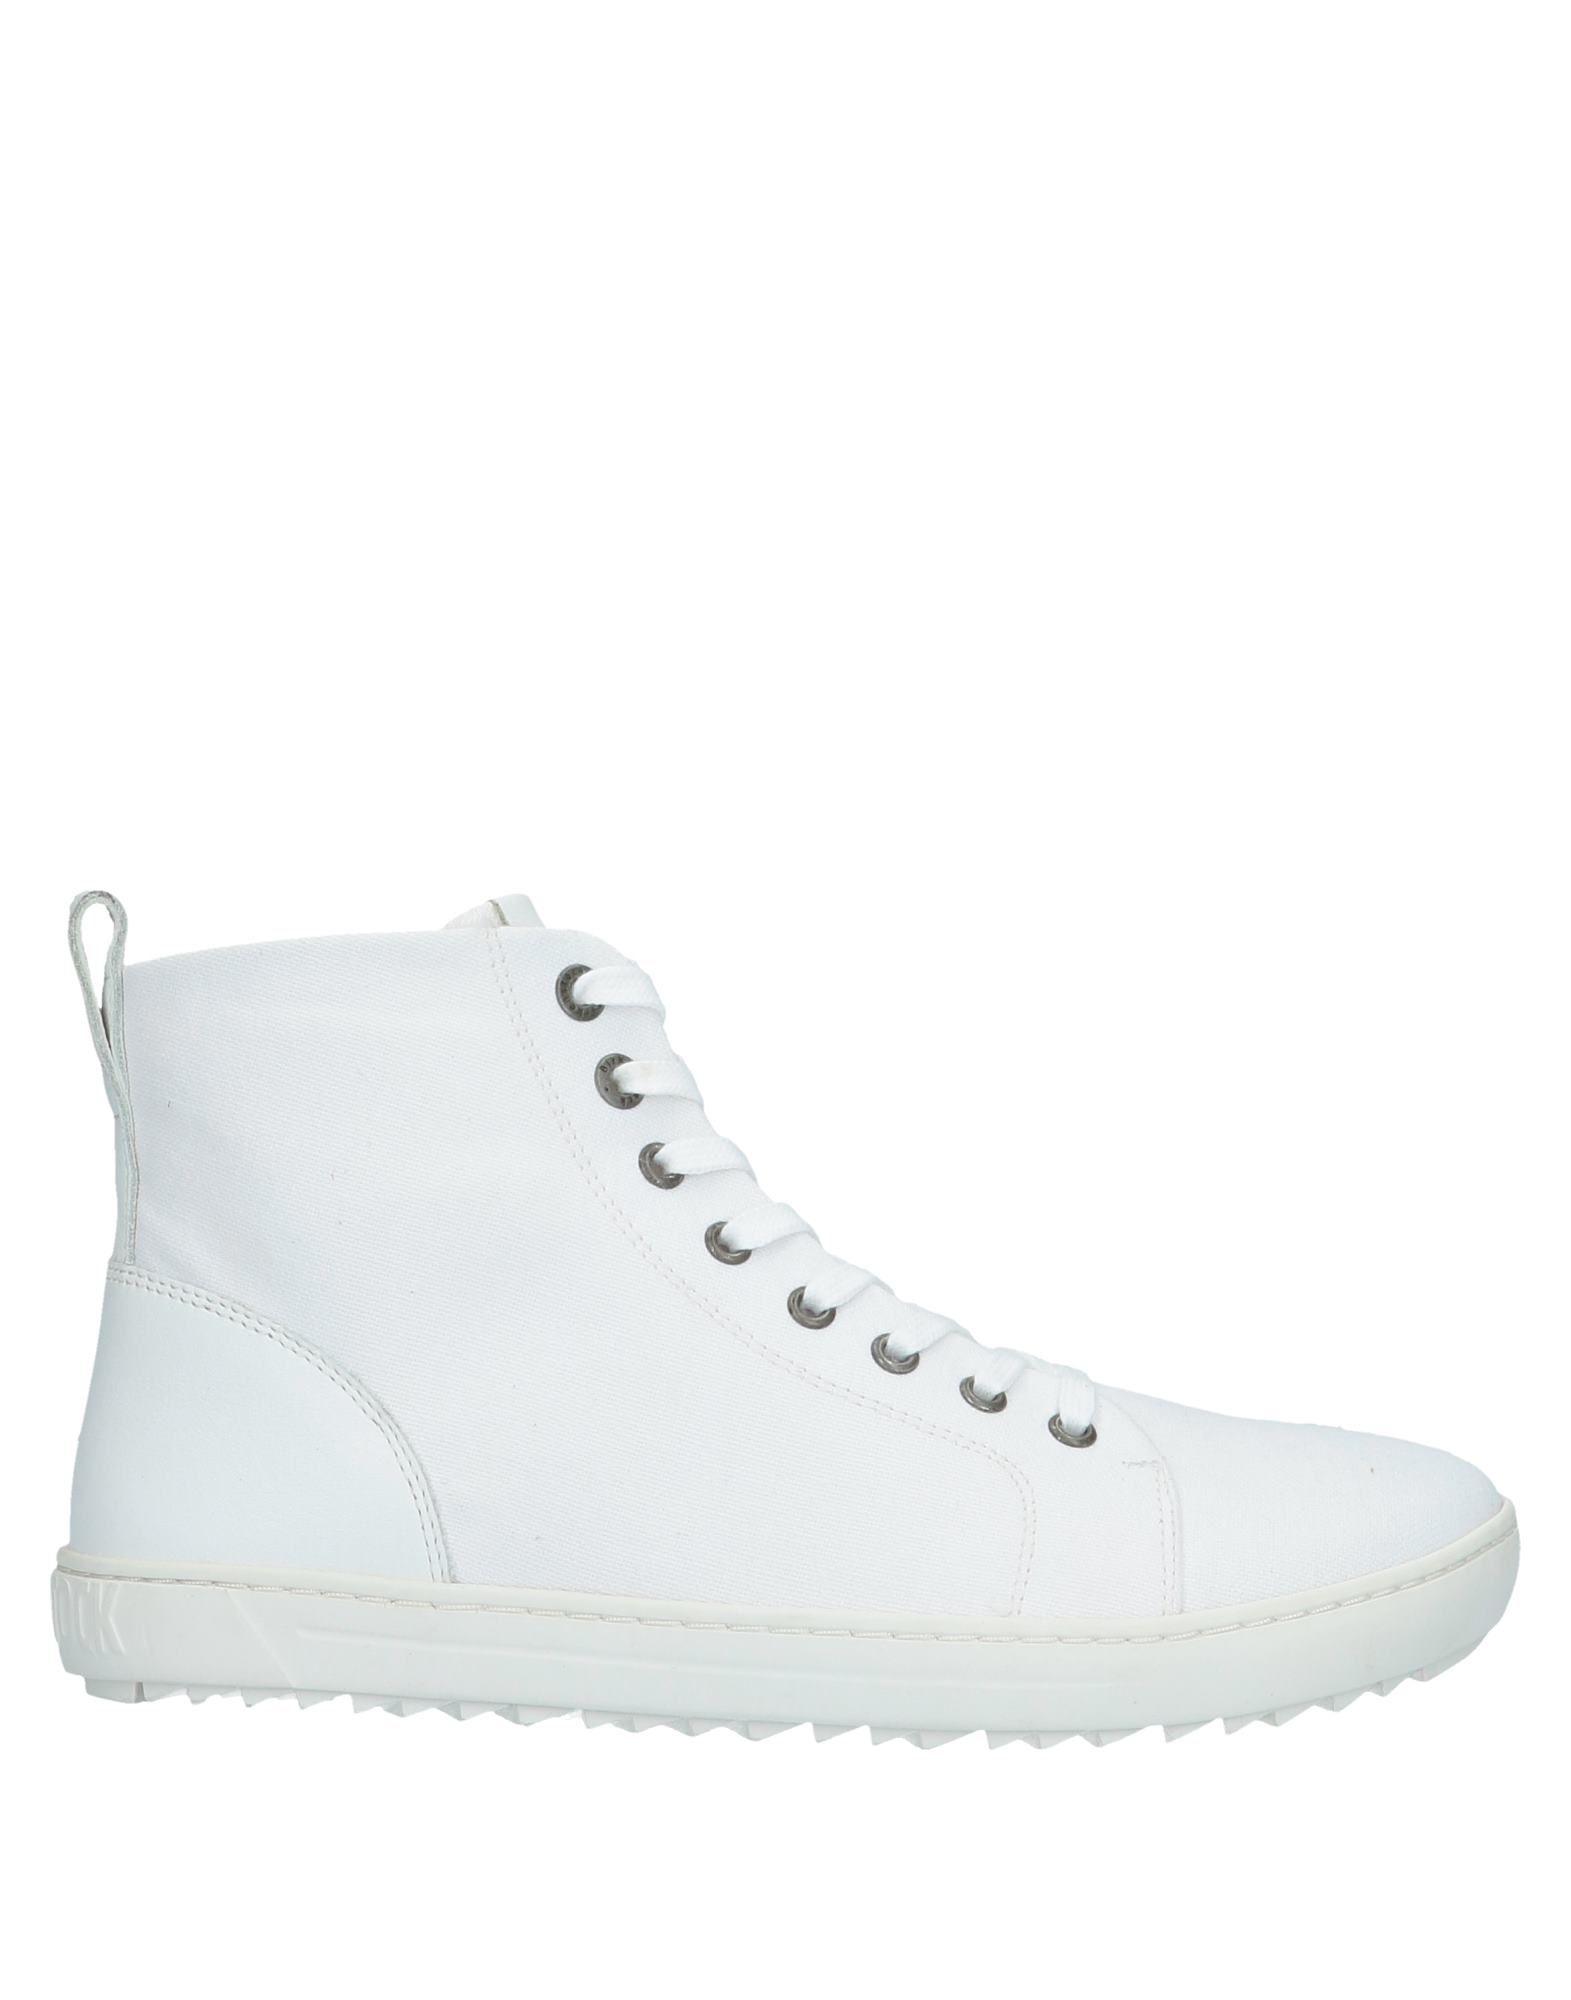 Birkenstock Leather High-tops & Sneakers in White - Lyst